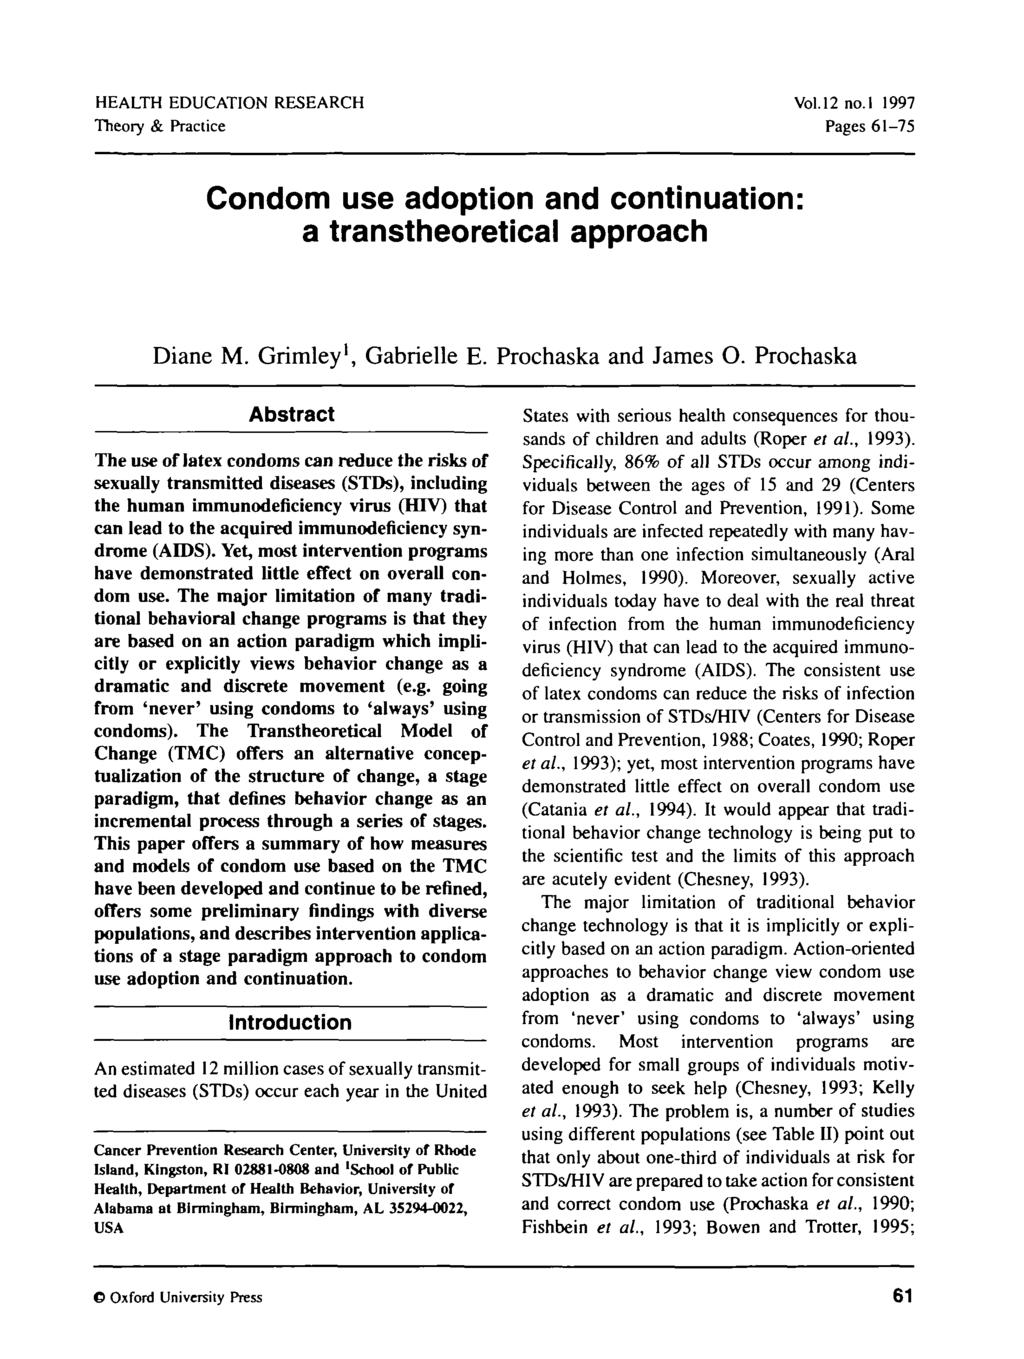 HEALTH EDUCATION RESEARCH Theory & Practice Vol.12 no.l 1997 Pages 61-75 Condom use adoption and continuation: a transtheoretical approach Diane M. Grimley 1, Gabrielle E. Prochaska and James O.